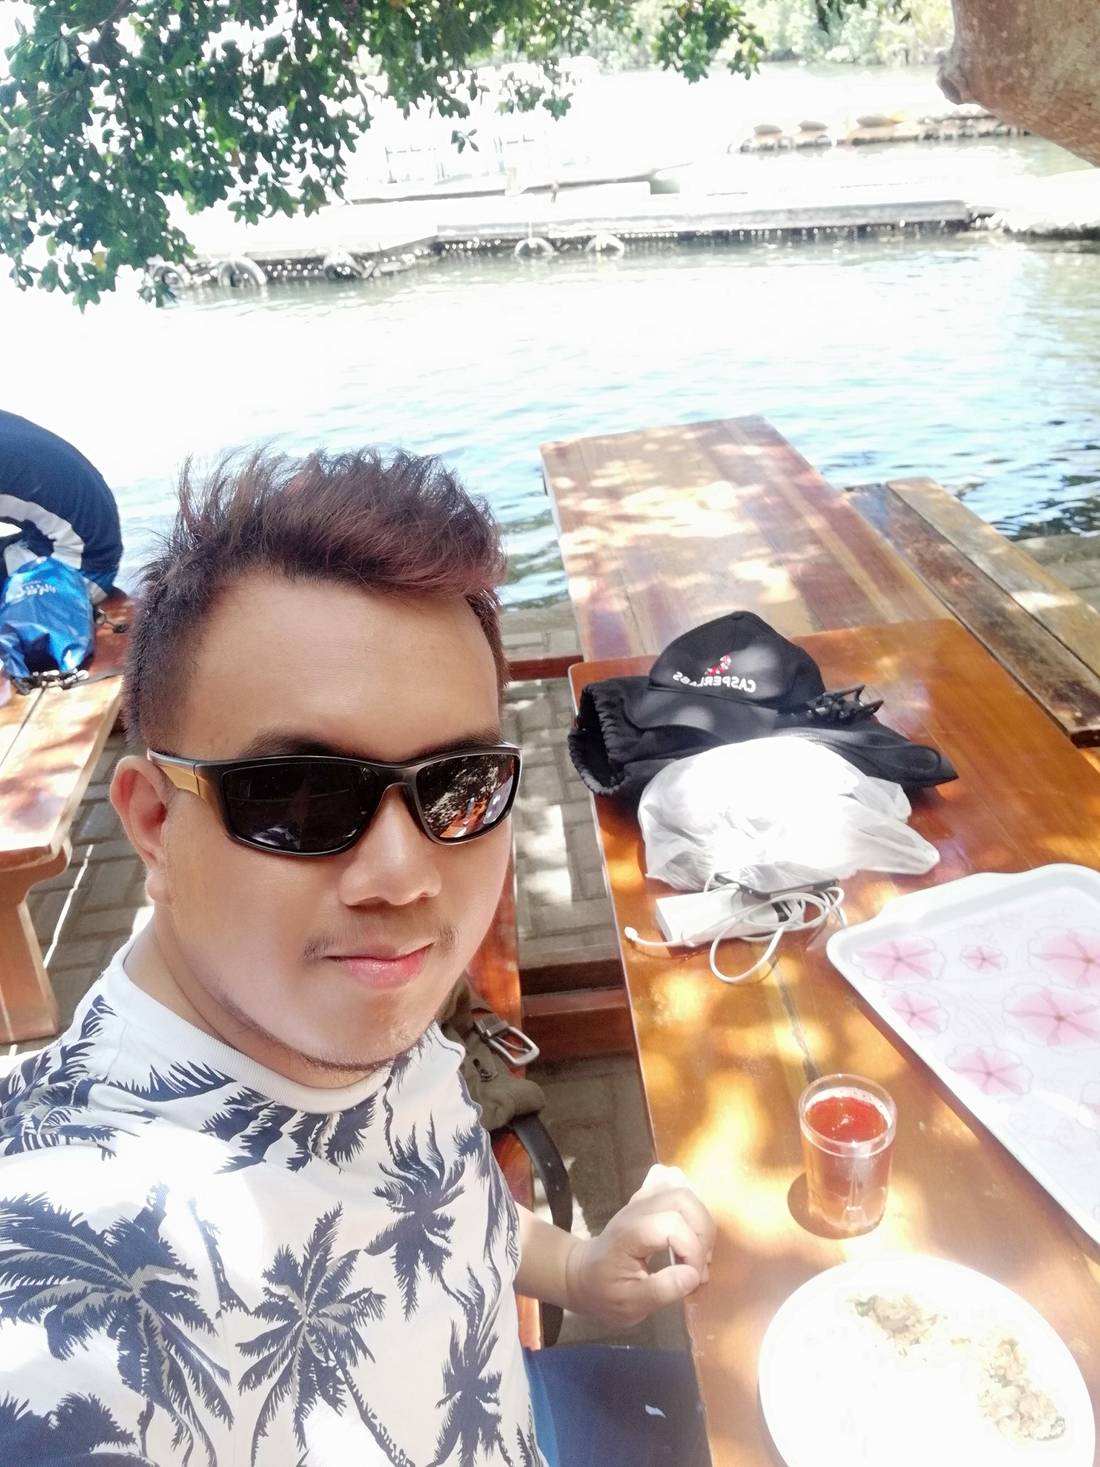 Eating my lunch at Lake Danao Park